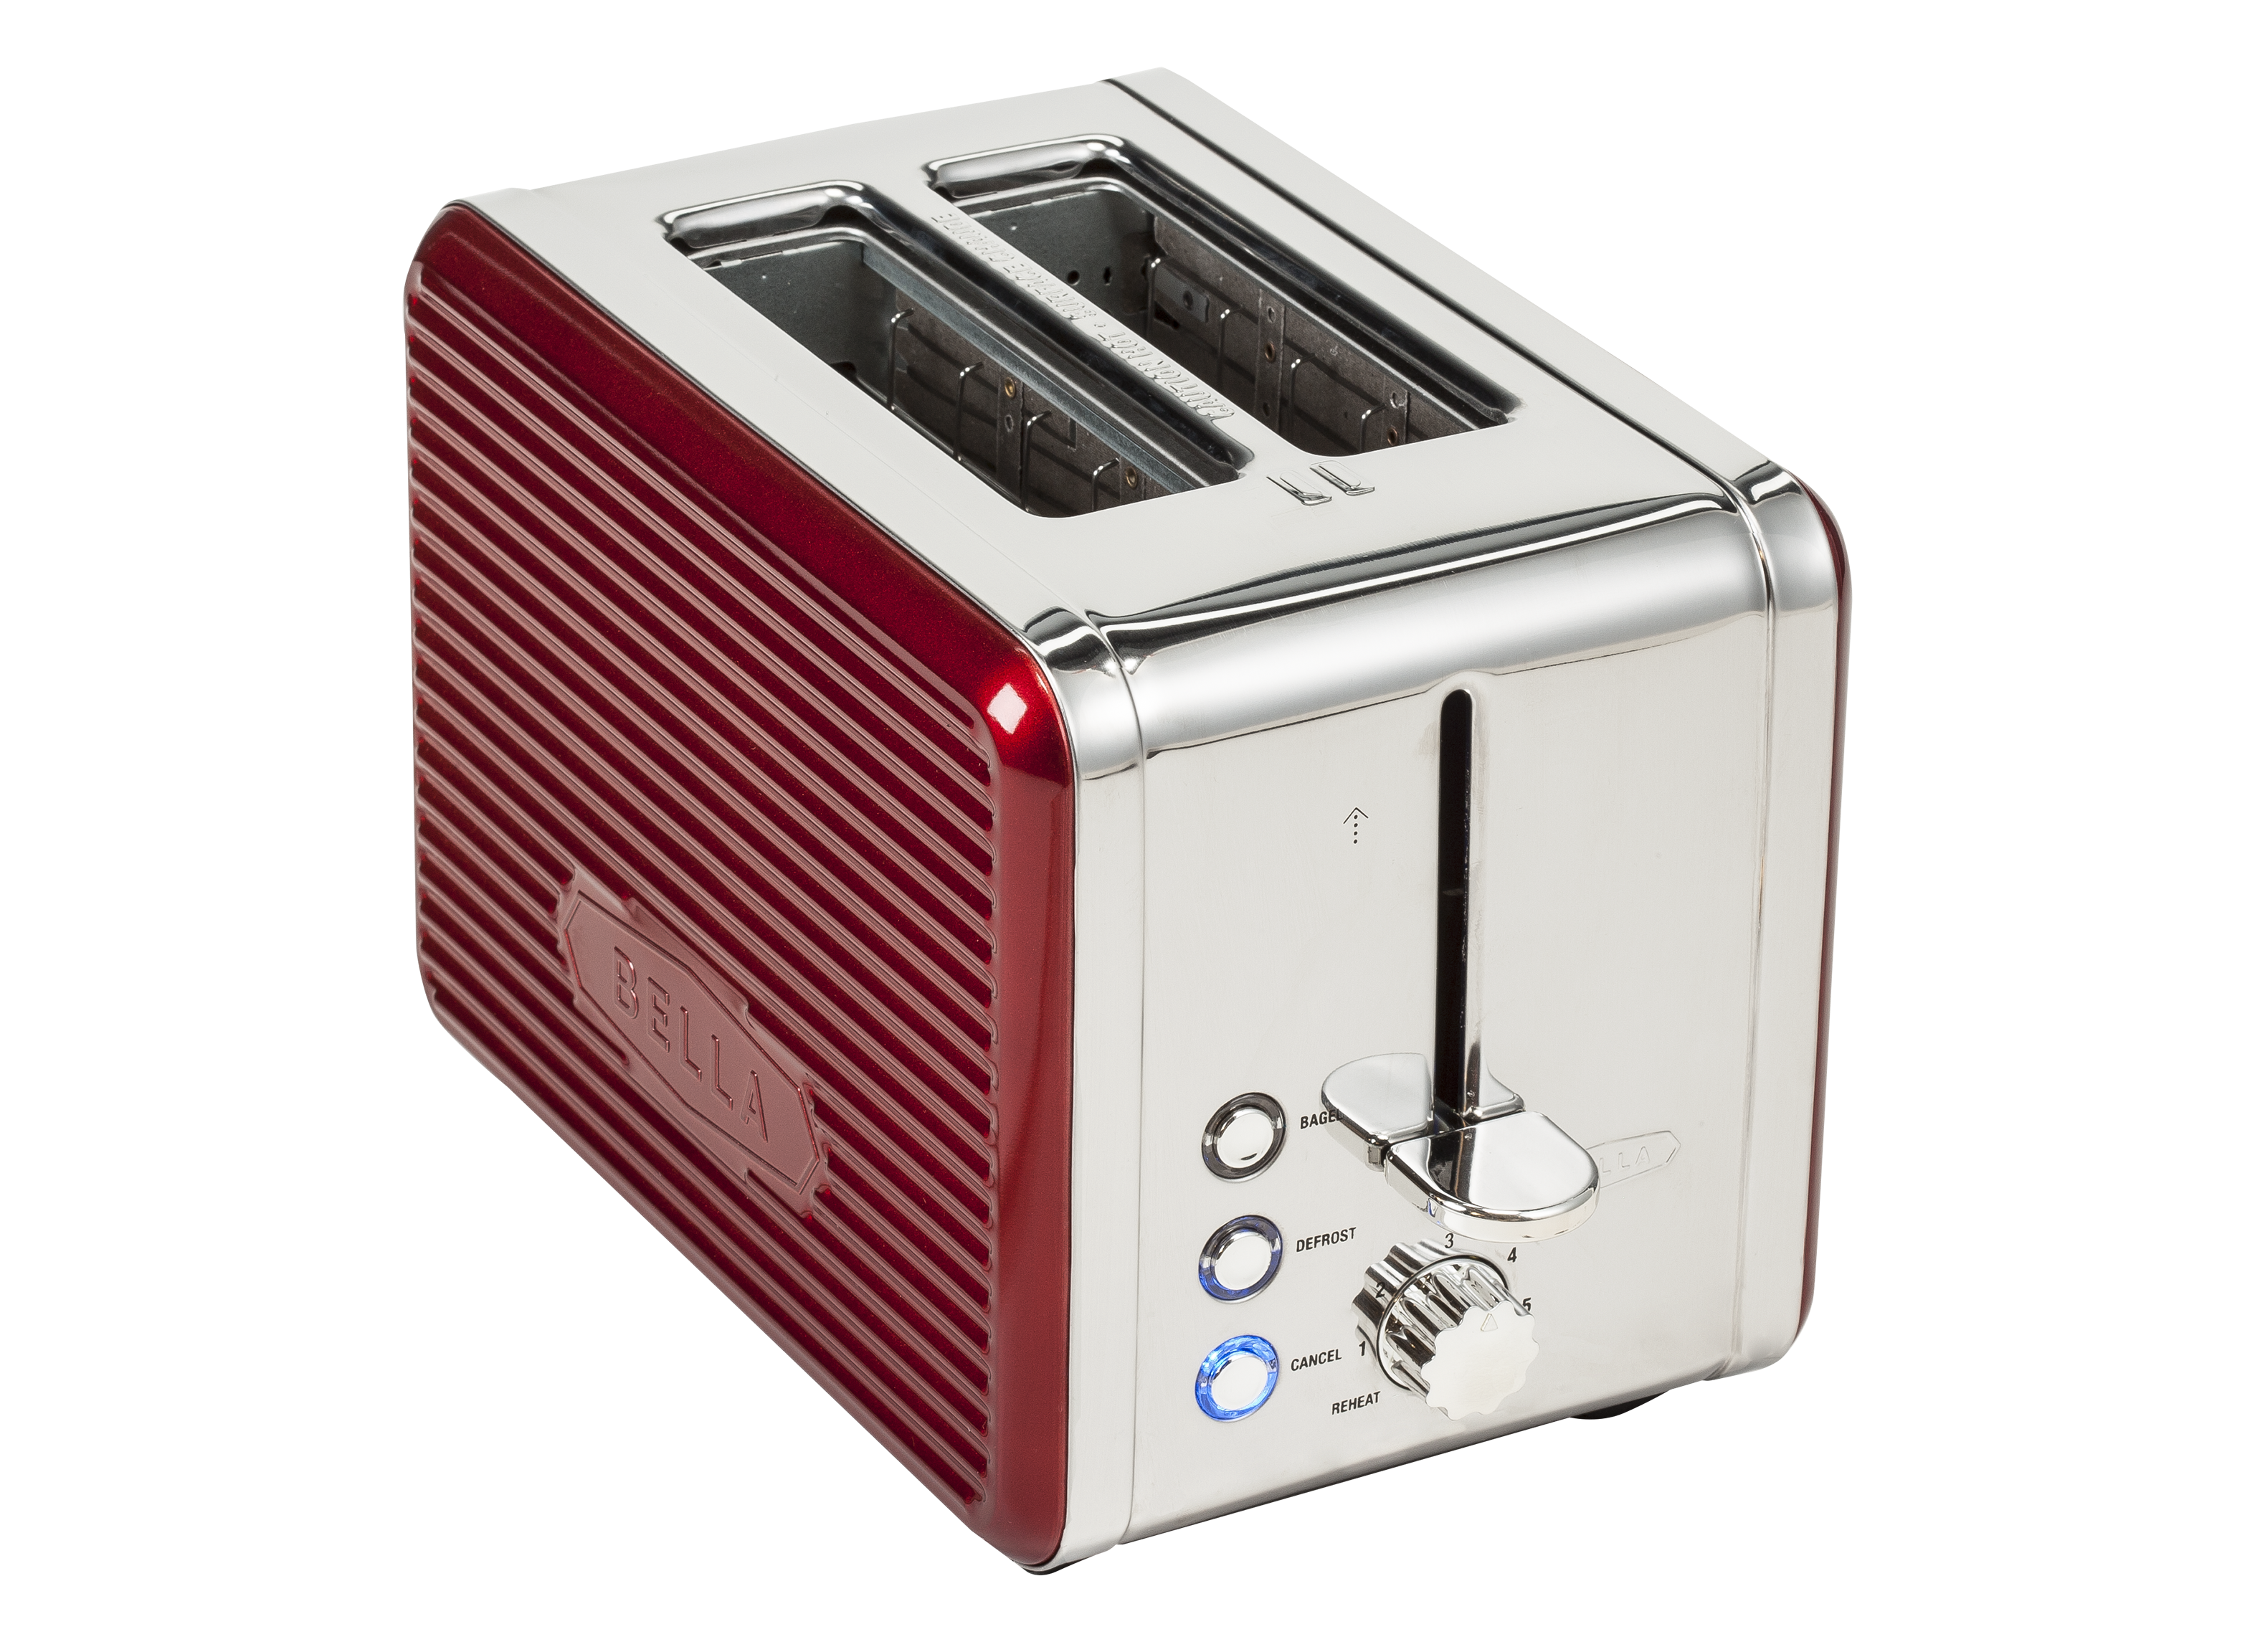 https://crdms.images.consumerreports.org/prod/products/cr/models/285114-toasters-bella-lineacollection2slice.png